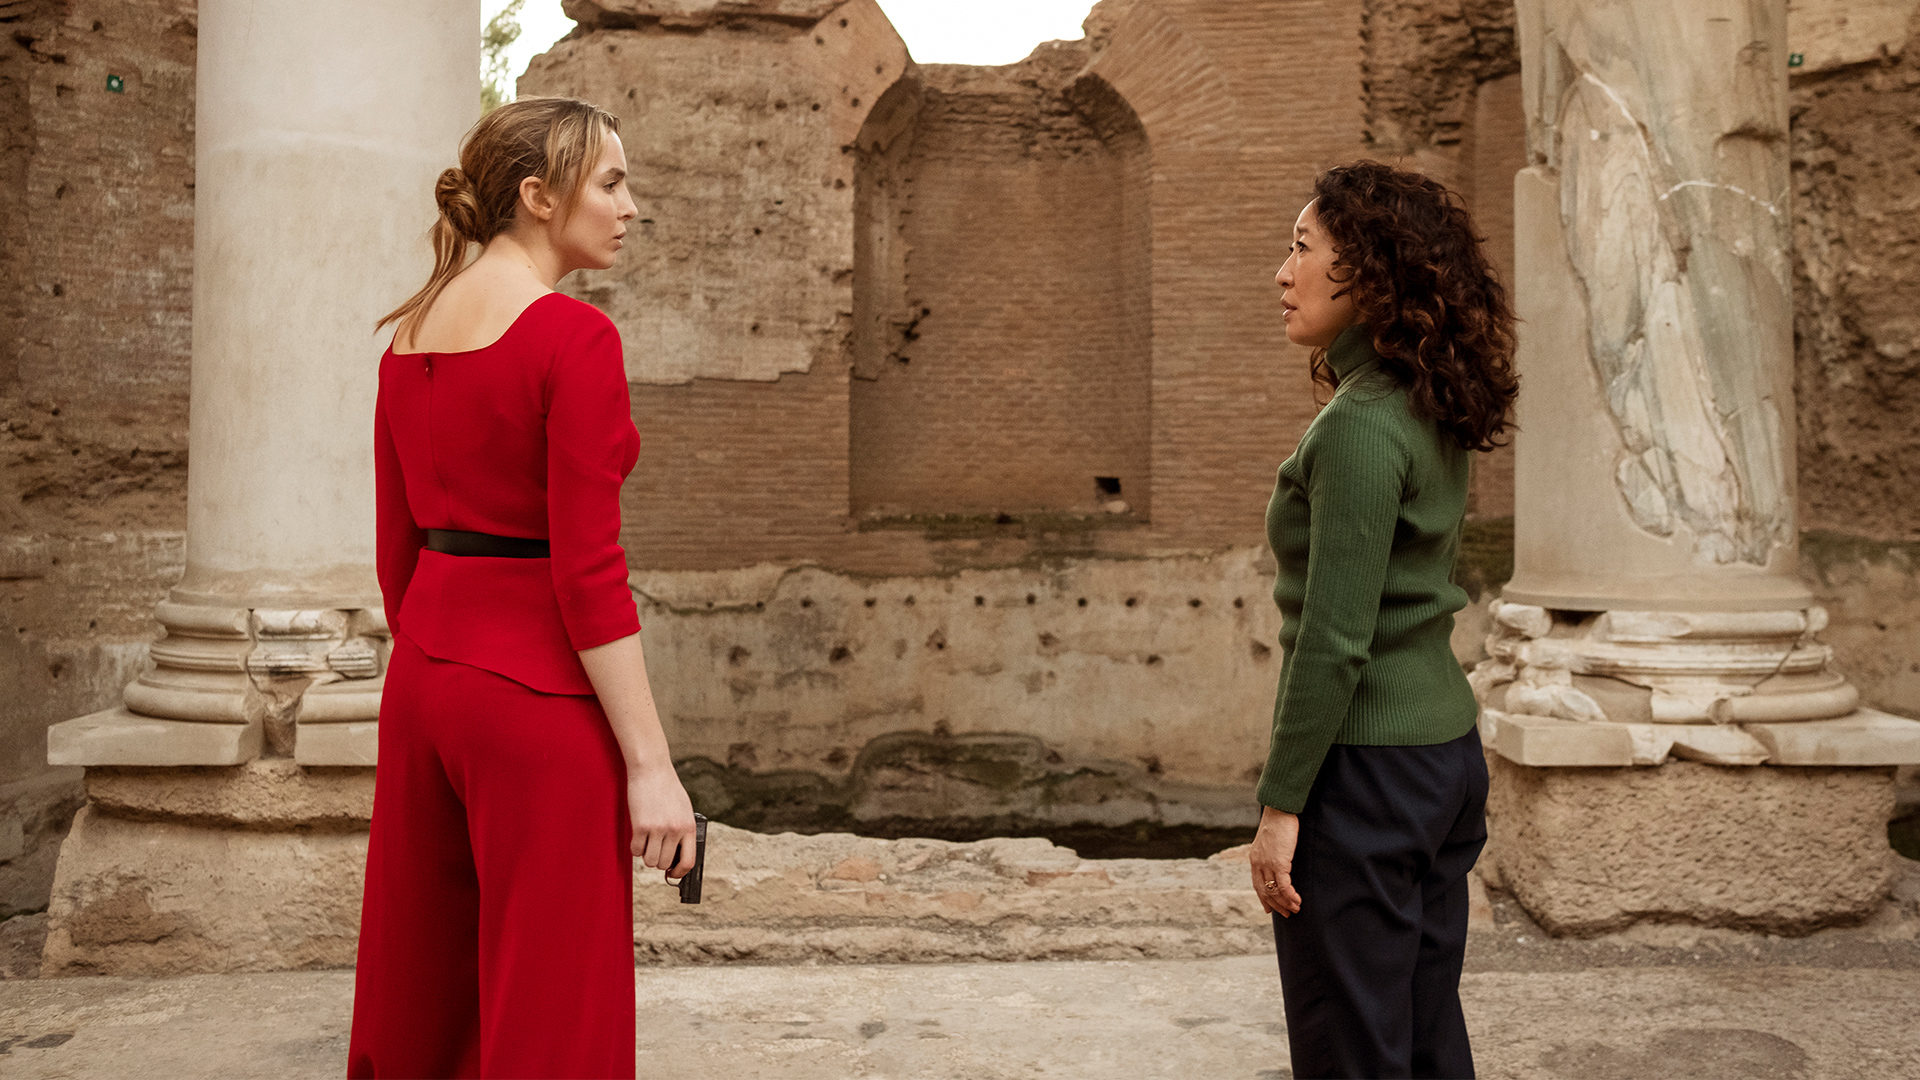 golden globes nominated killing eve gets early season four renewal before third season arrives this spring